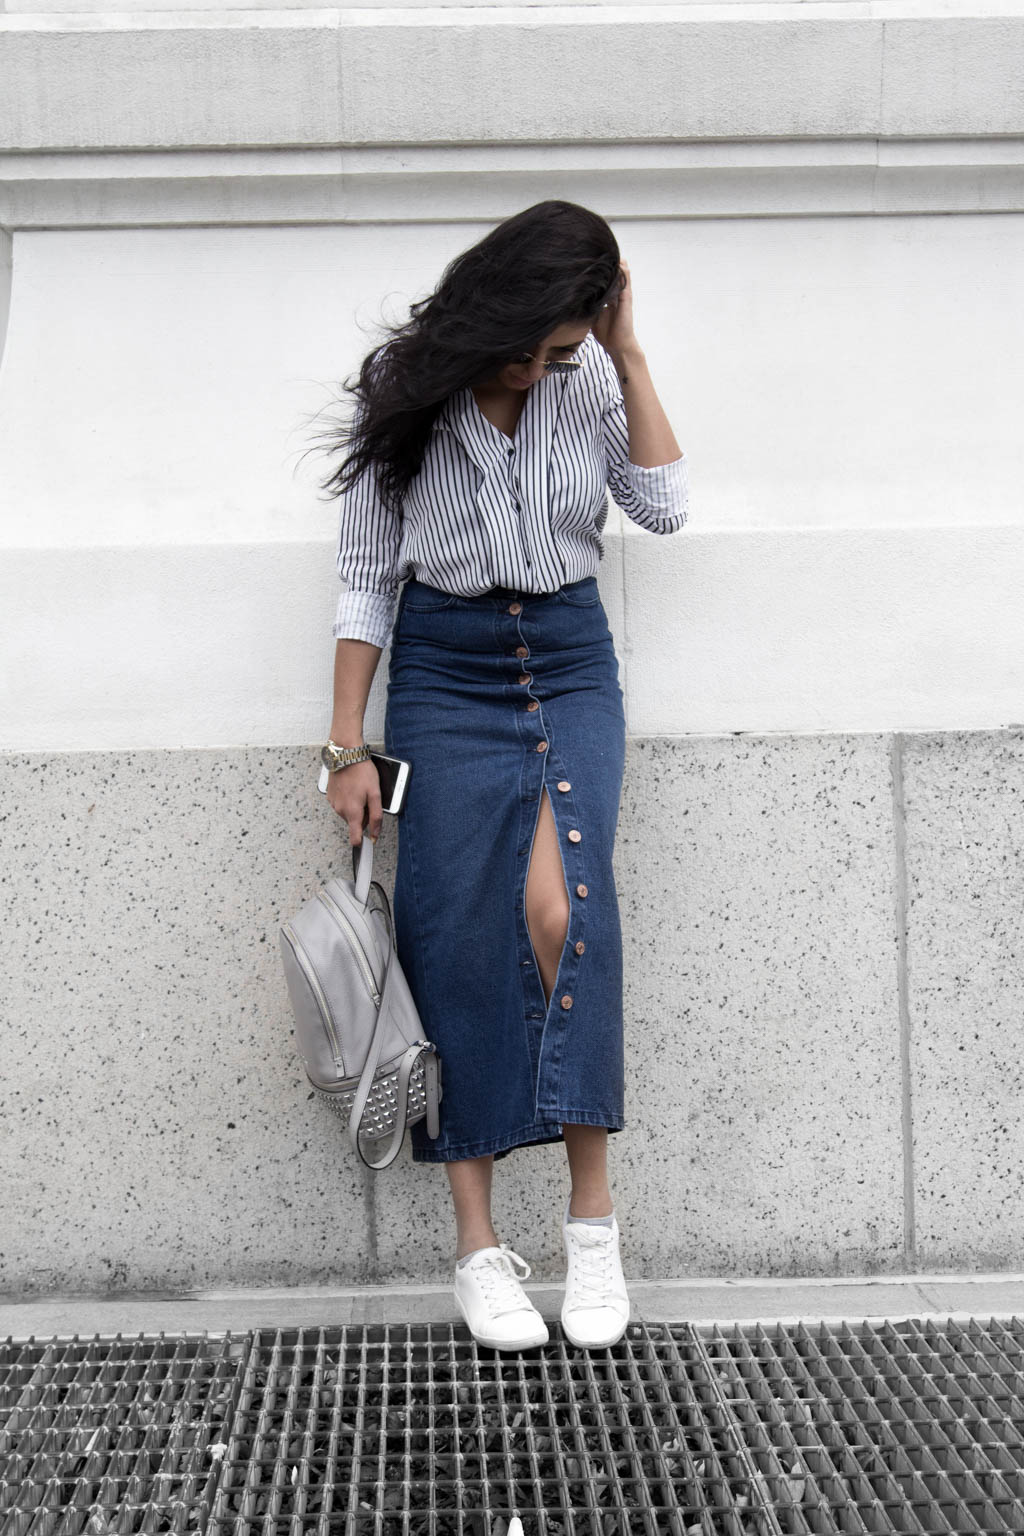 jeans skirt and sneakers